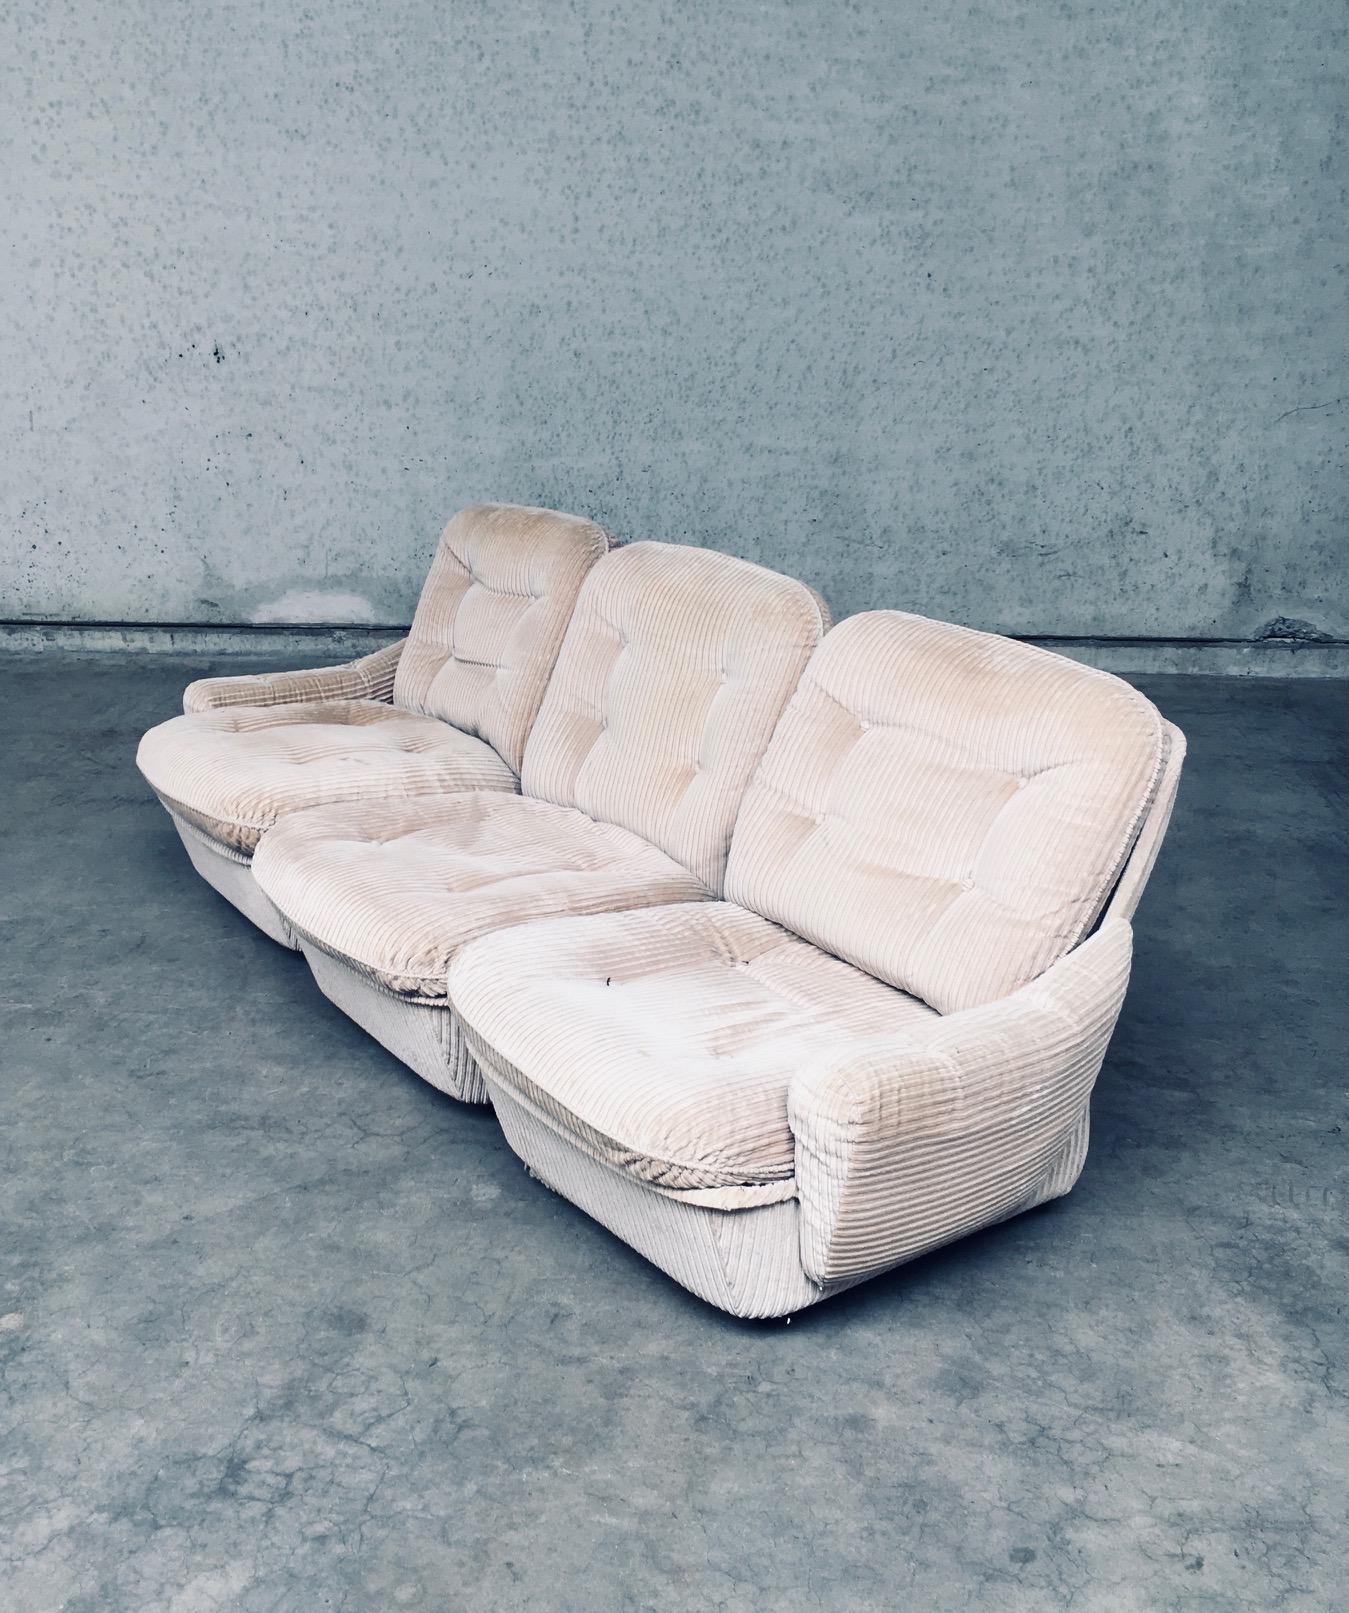 Fabric ORCHID Modular Sofa & Armchair by Michel Cadestin for Airborne, France 1970's For Sale